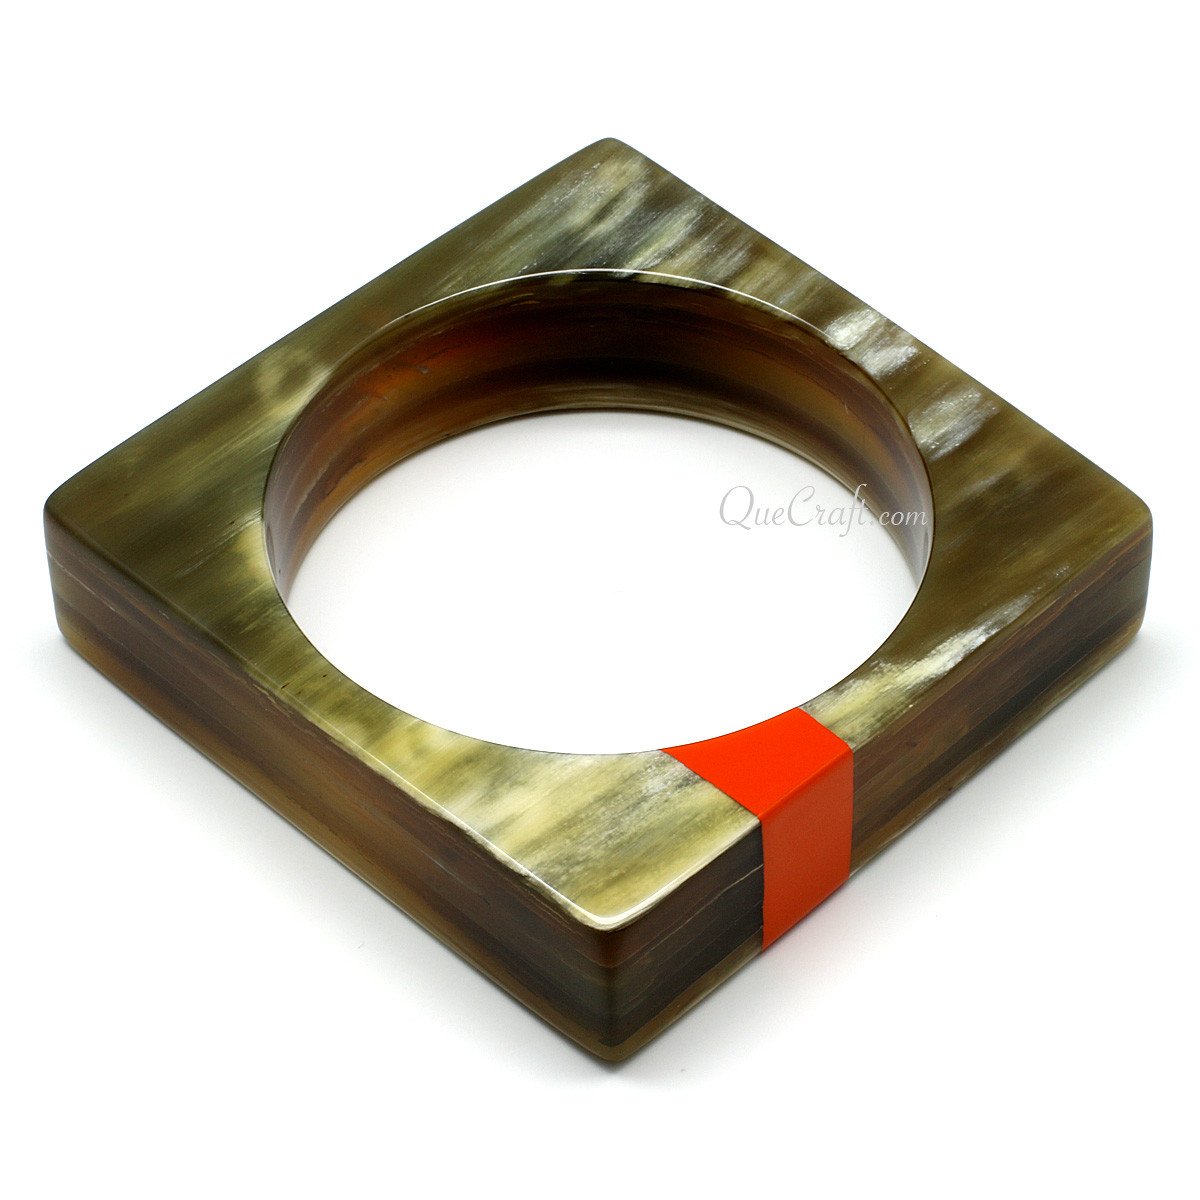 Horn & Lacquer Bangle Bracelet #11089 - HORN JEWELRY